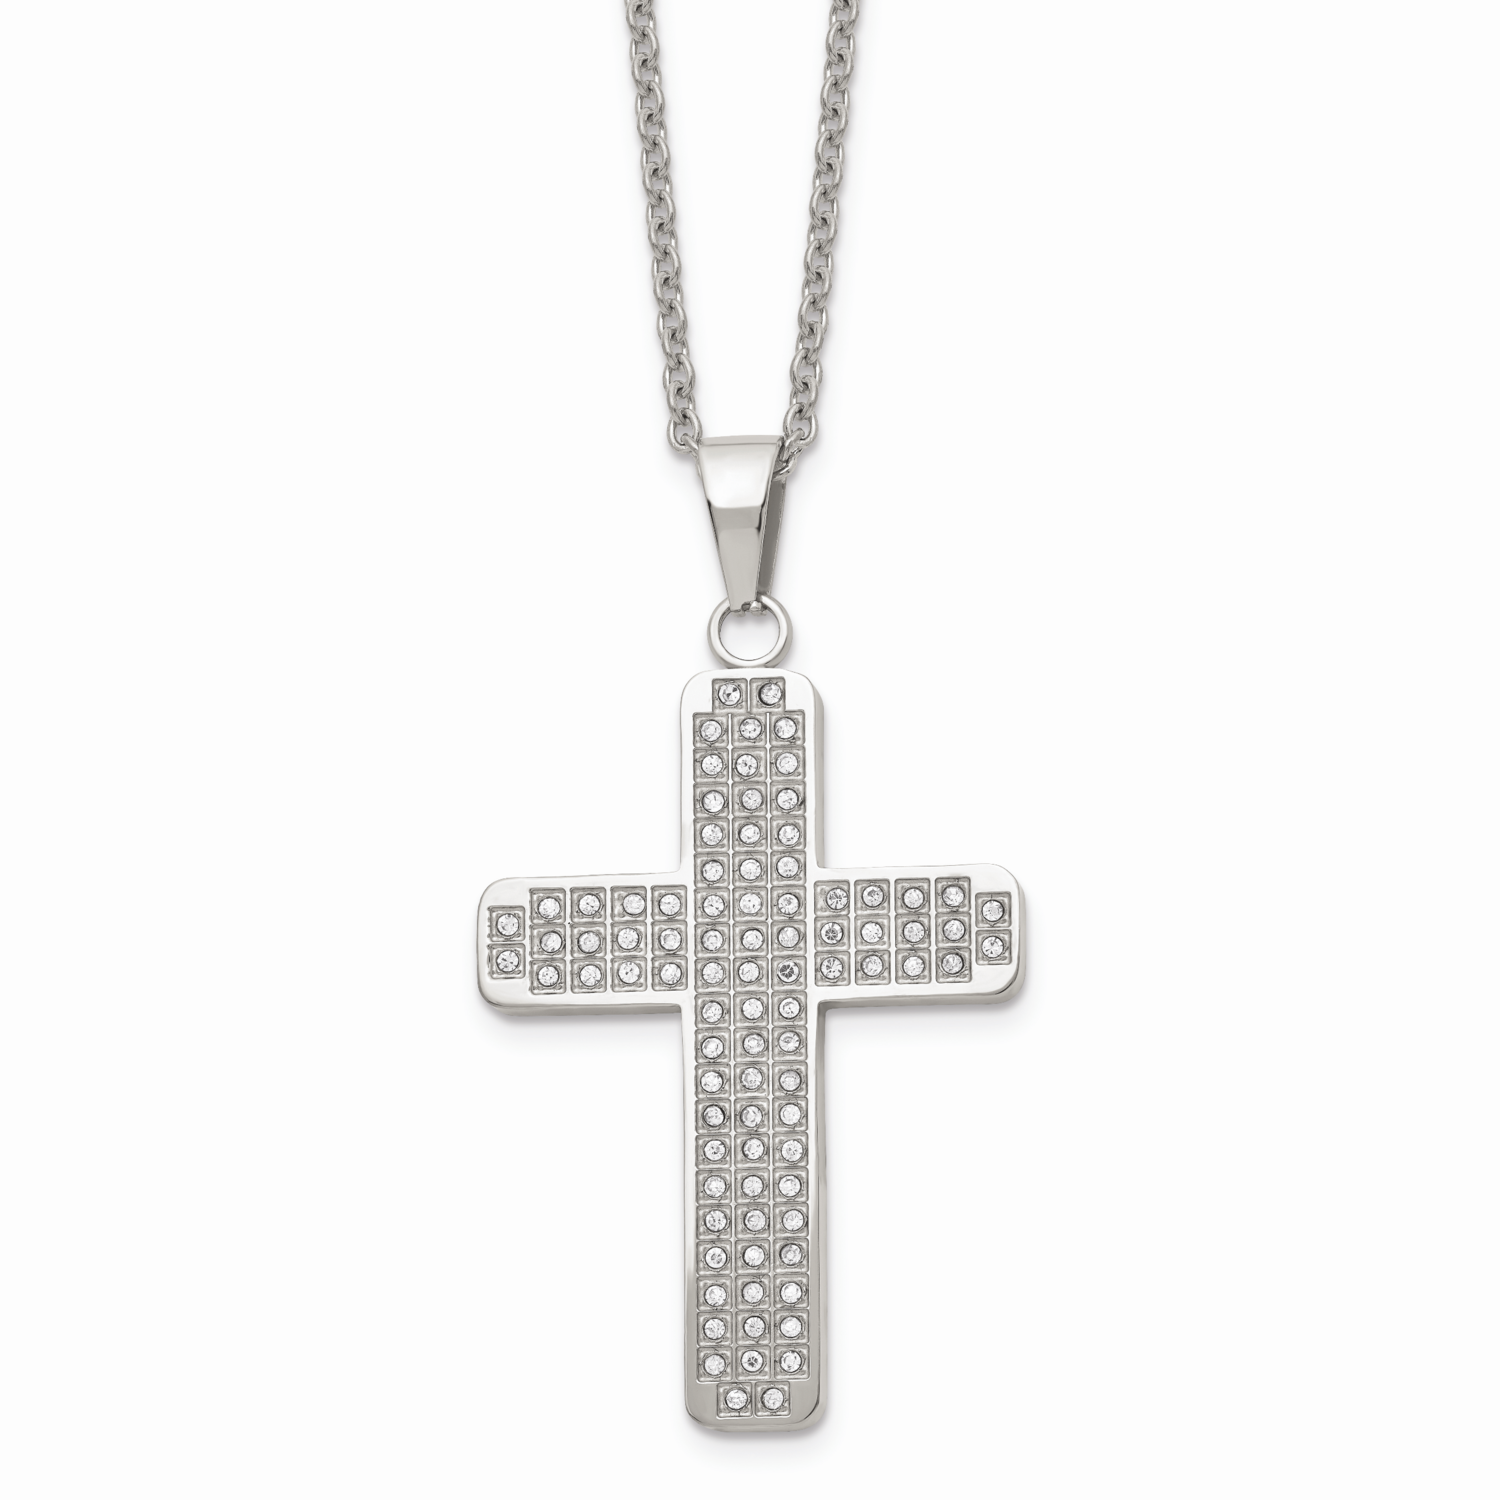 CZ Stone Cross Pendant 22 Inch Necklace Stainless Steel SRN513-22